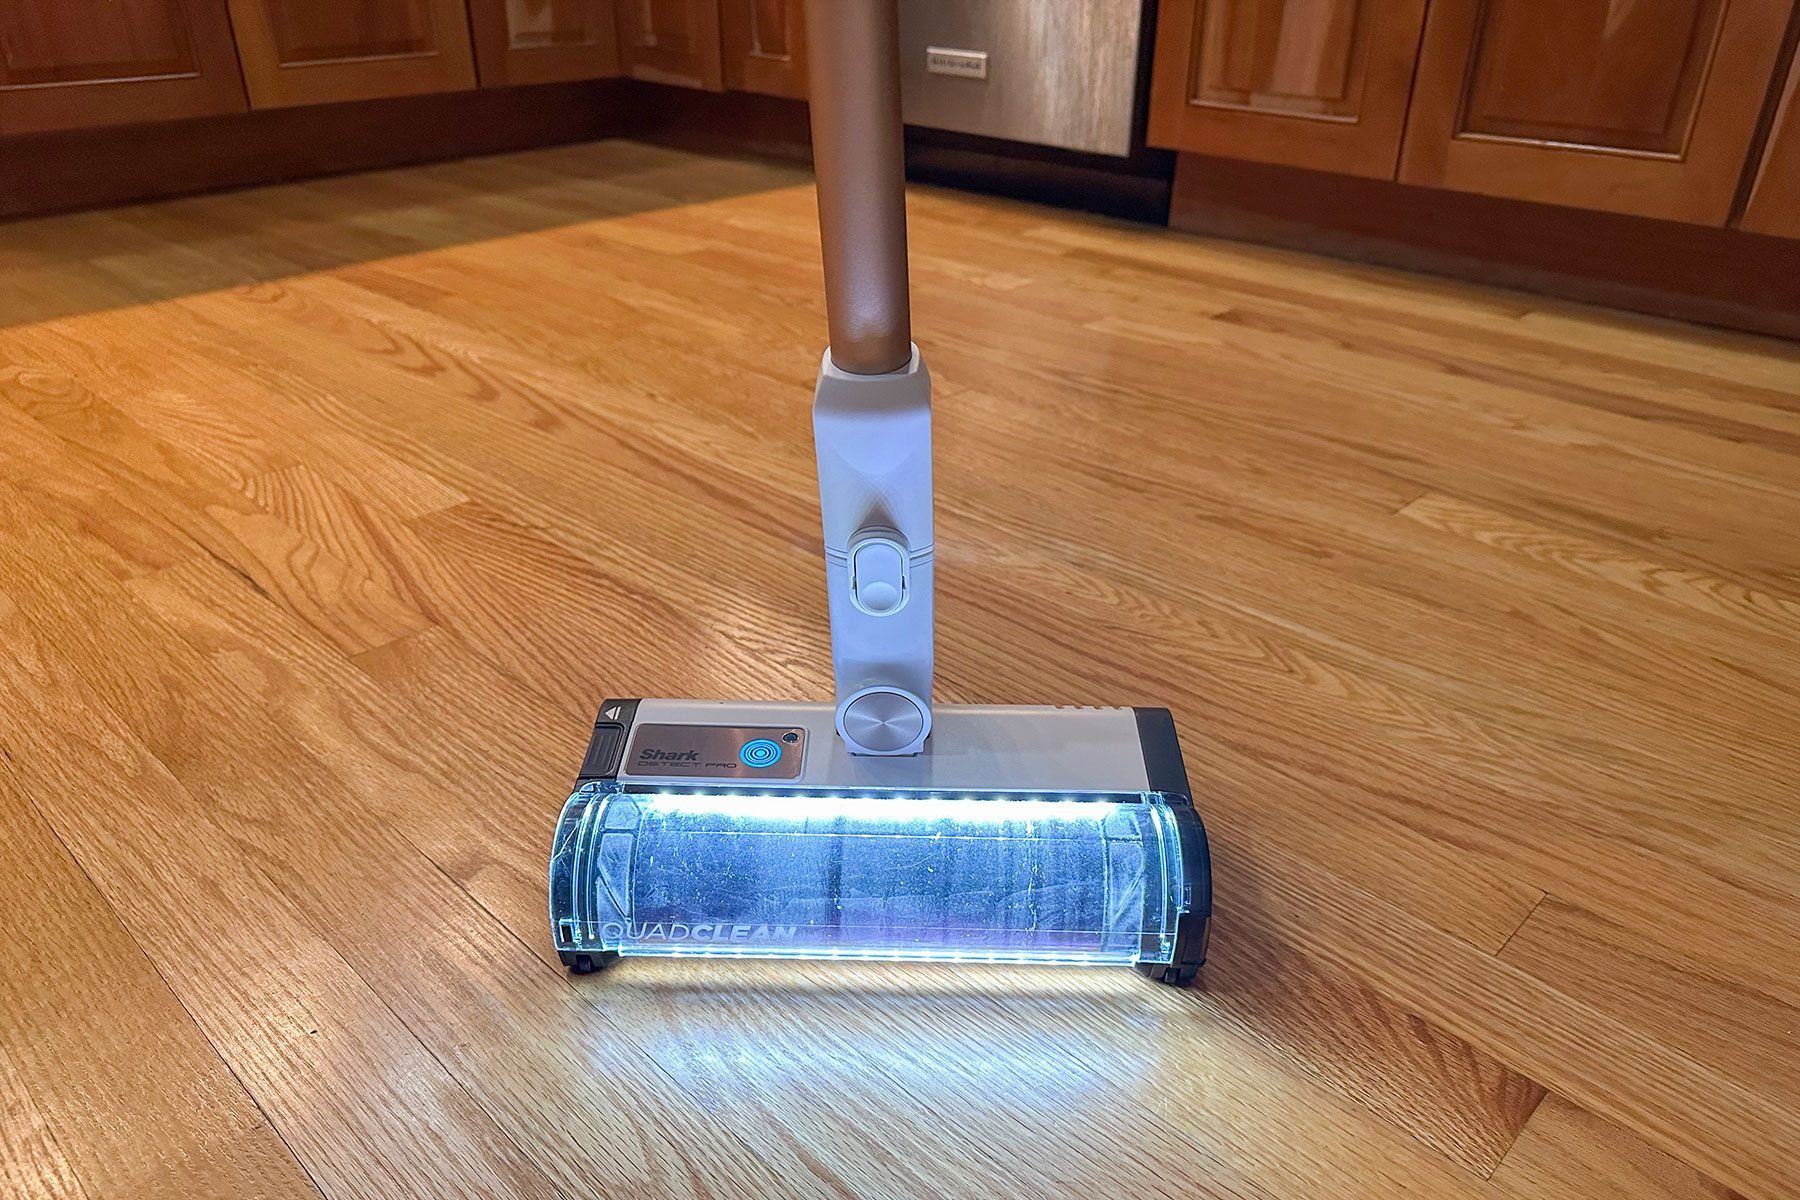 Shark Cordless Pro Vacuum cleaning the floor